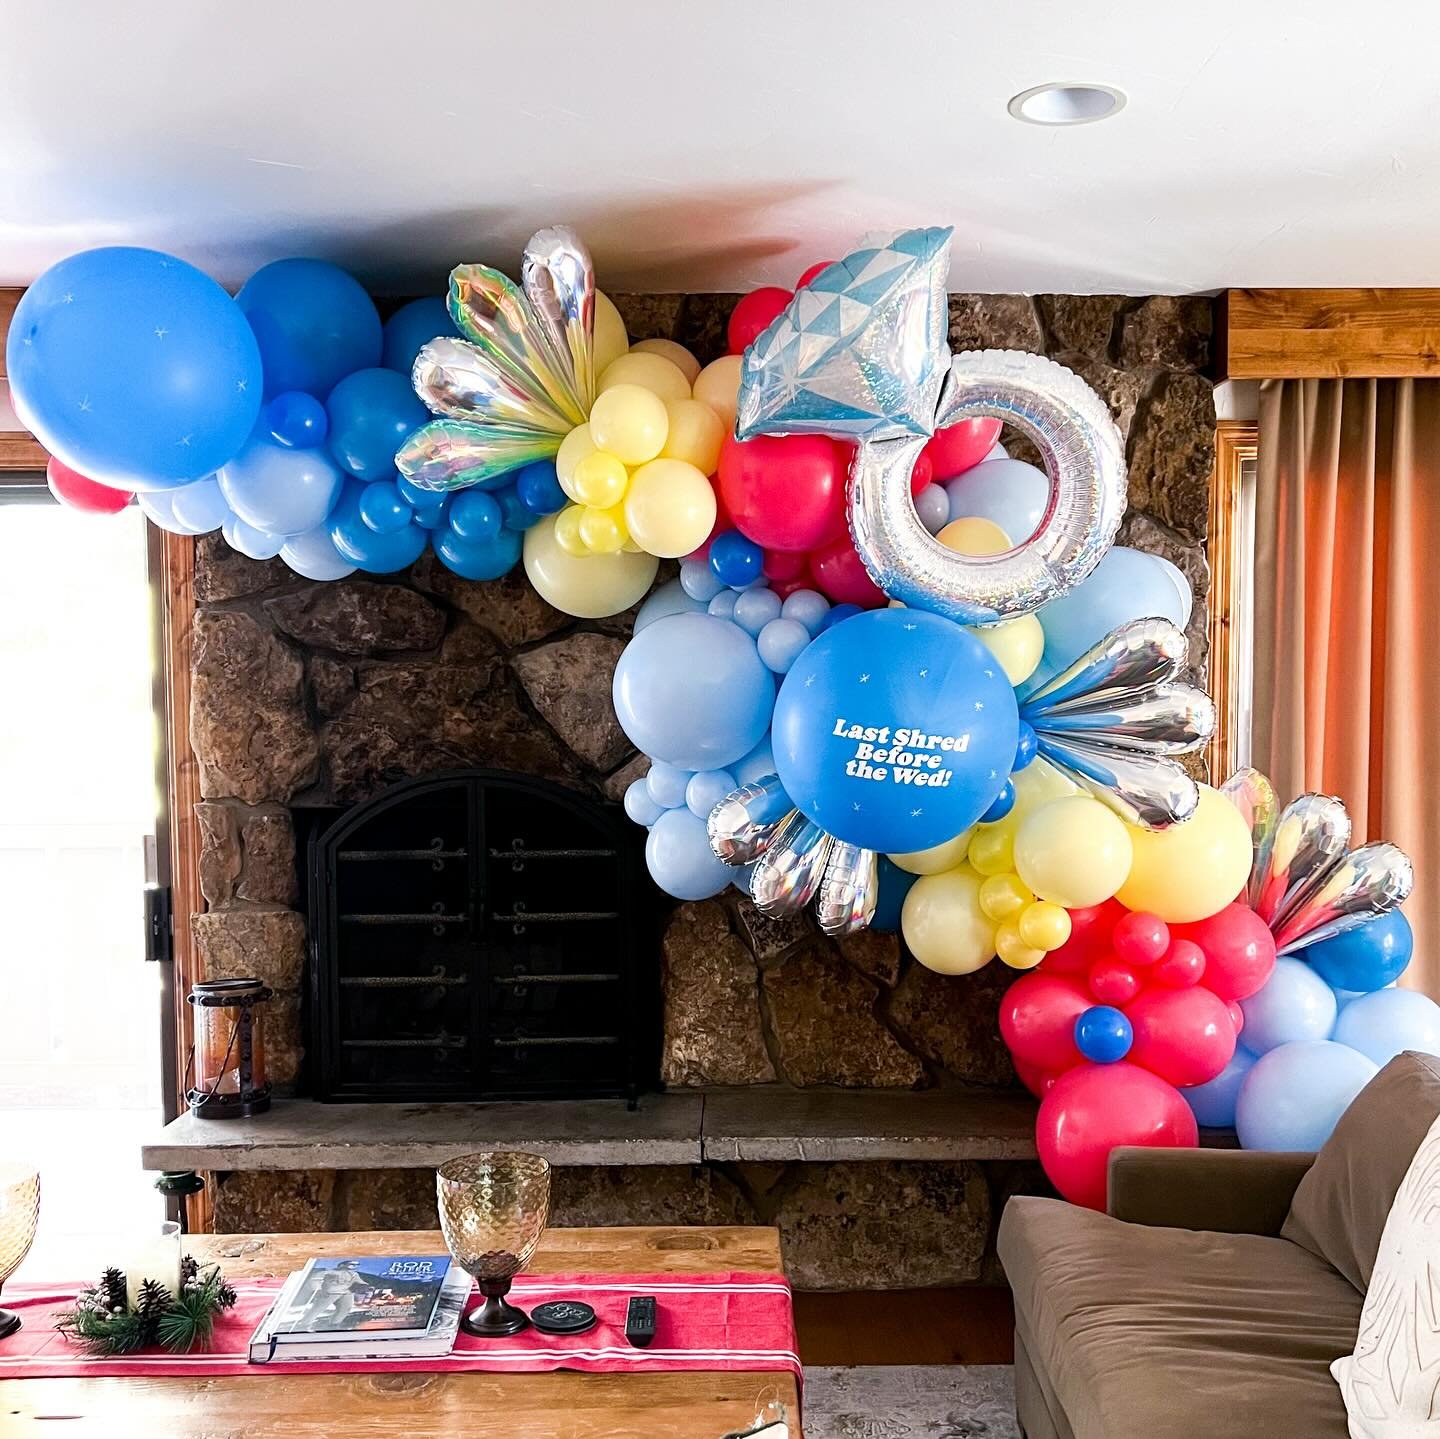 Last shred 🏂👰🏼&zwj;♀️ Before the wed! 
.

.
.
. #balloontower #balloon #birthdayballoons #birthday🎂 #balloons #organic balloons #balloonprofessional #balloonmosaic ballooncolumn #balloonarrangement #balloonmarquee #obsessed #🎈 #vail #balloonstyl